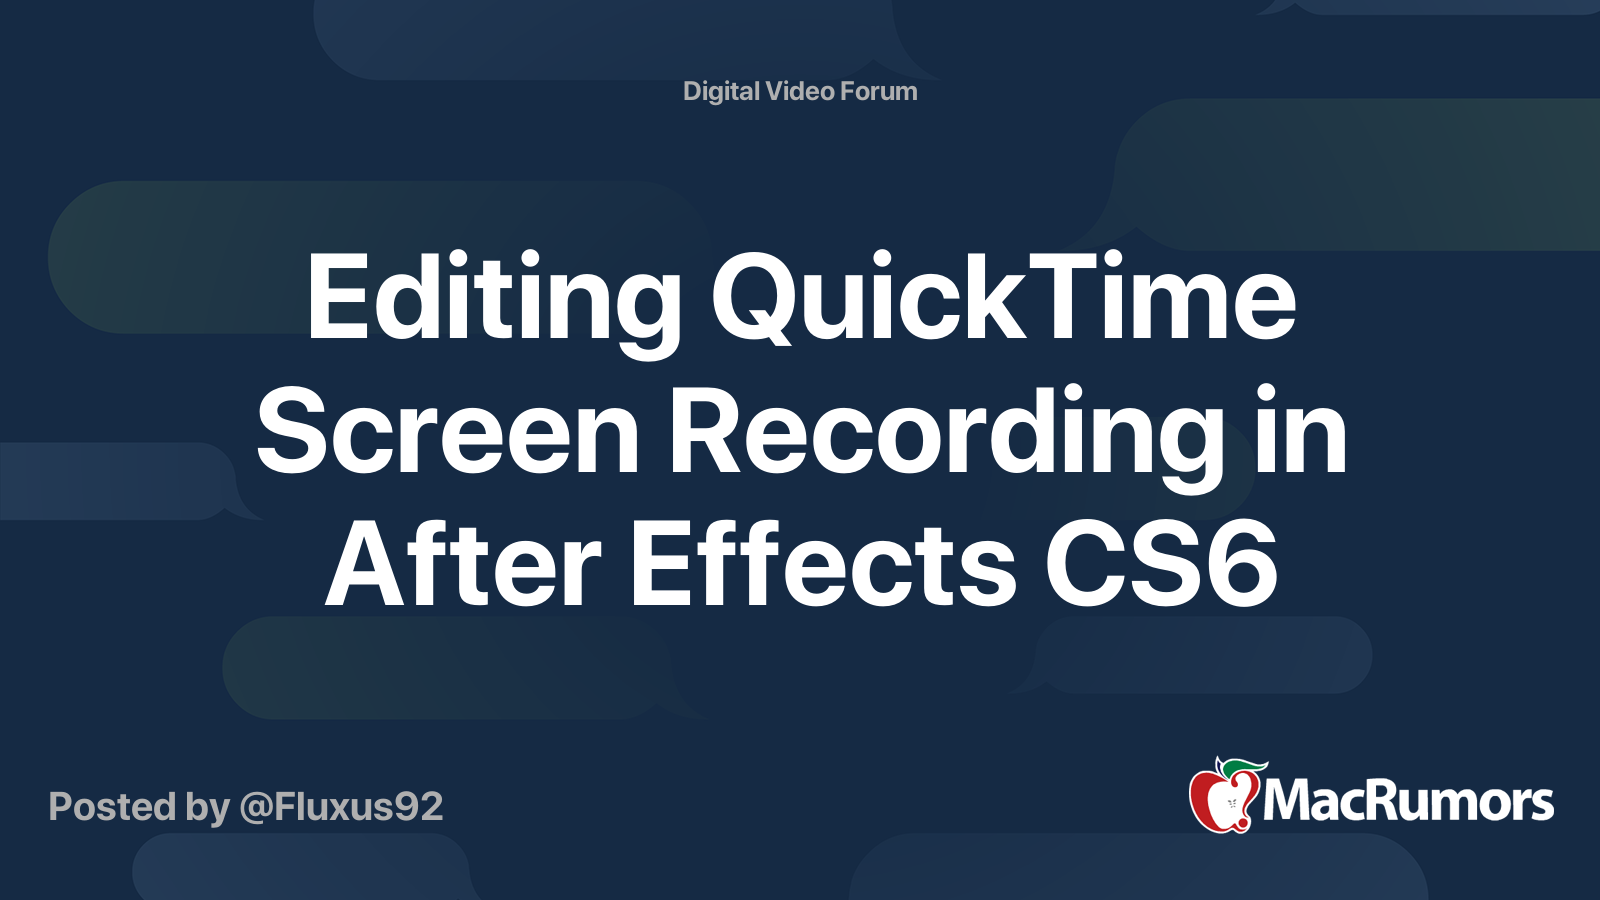 download quicktime for after effects cs6